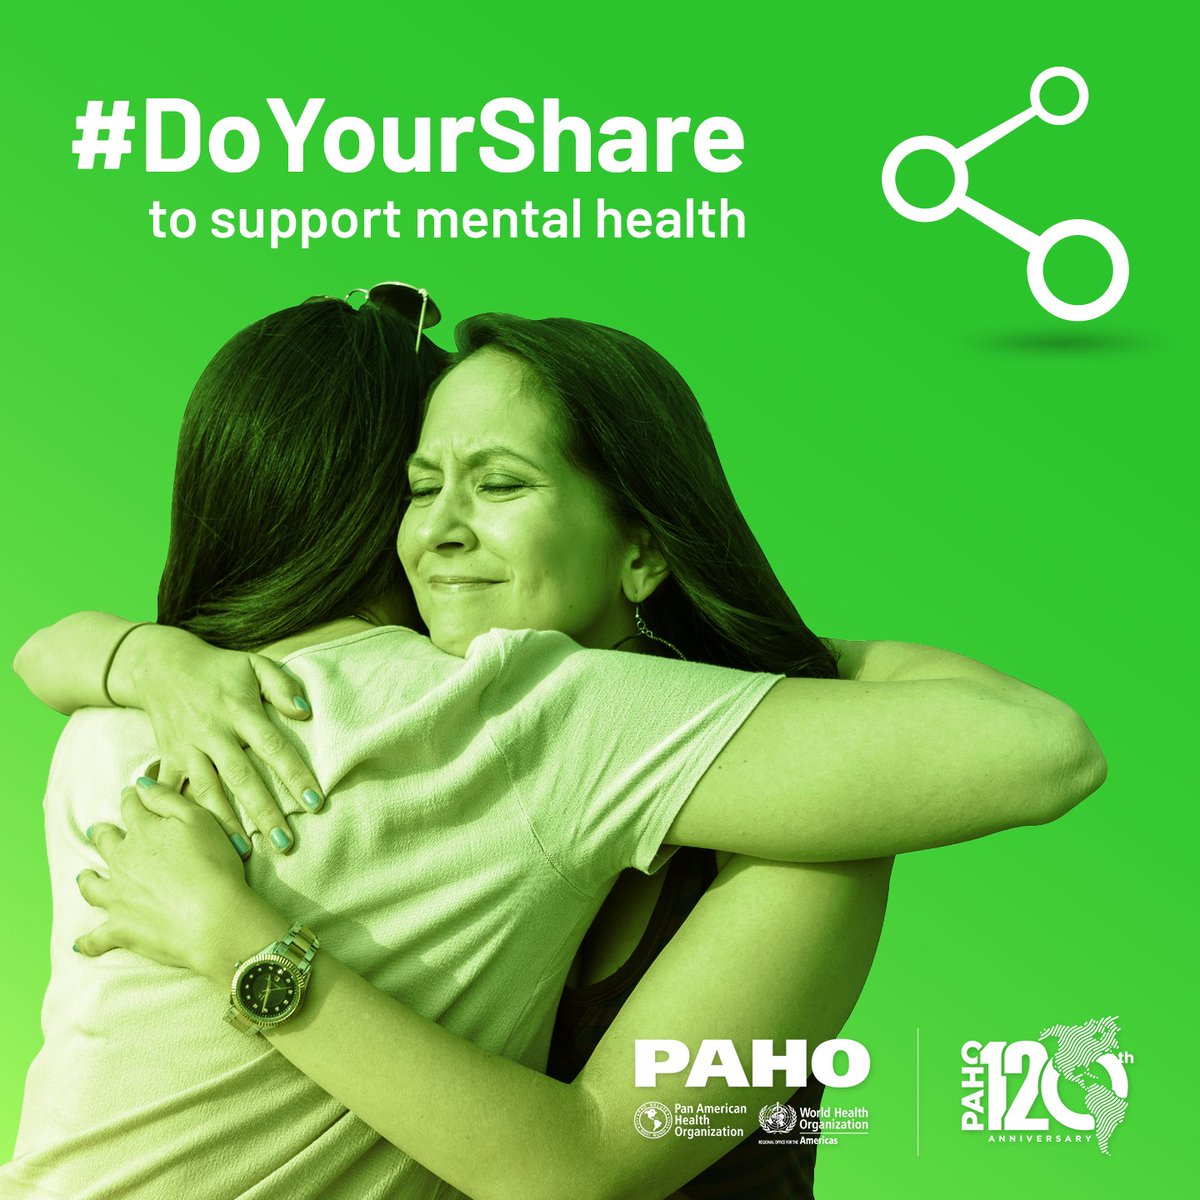 Taking care of ourselves is important all year round.
🟢 Follow a healthy diet

🟢 Engage in regular physical activity

🟢Maintain regular sleeping patterns

🟢Keep in touch with friends and family
#DoYourShare. Be kind to yourself and support your mental health and well-being.❤